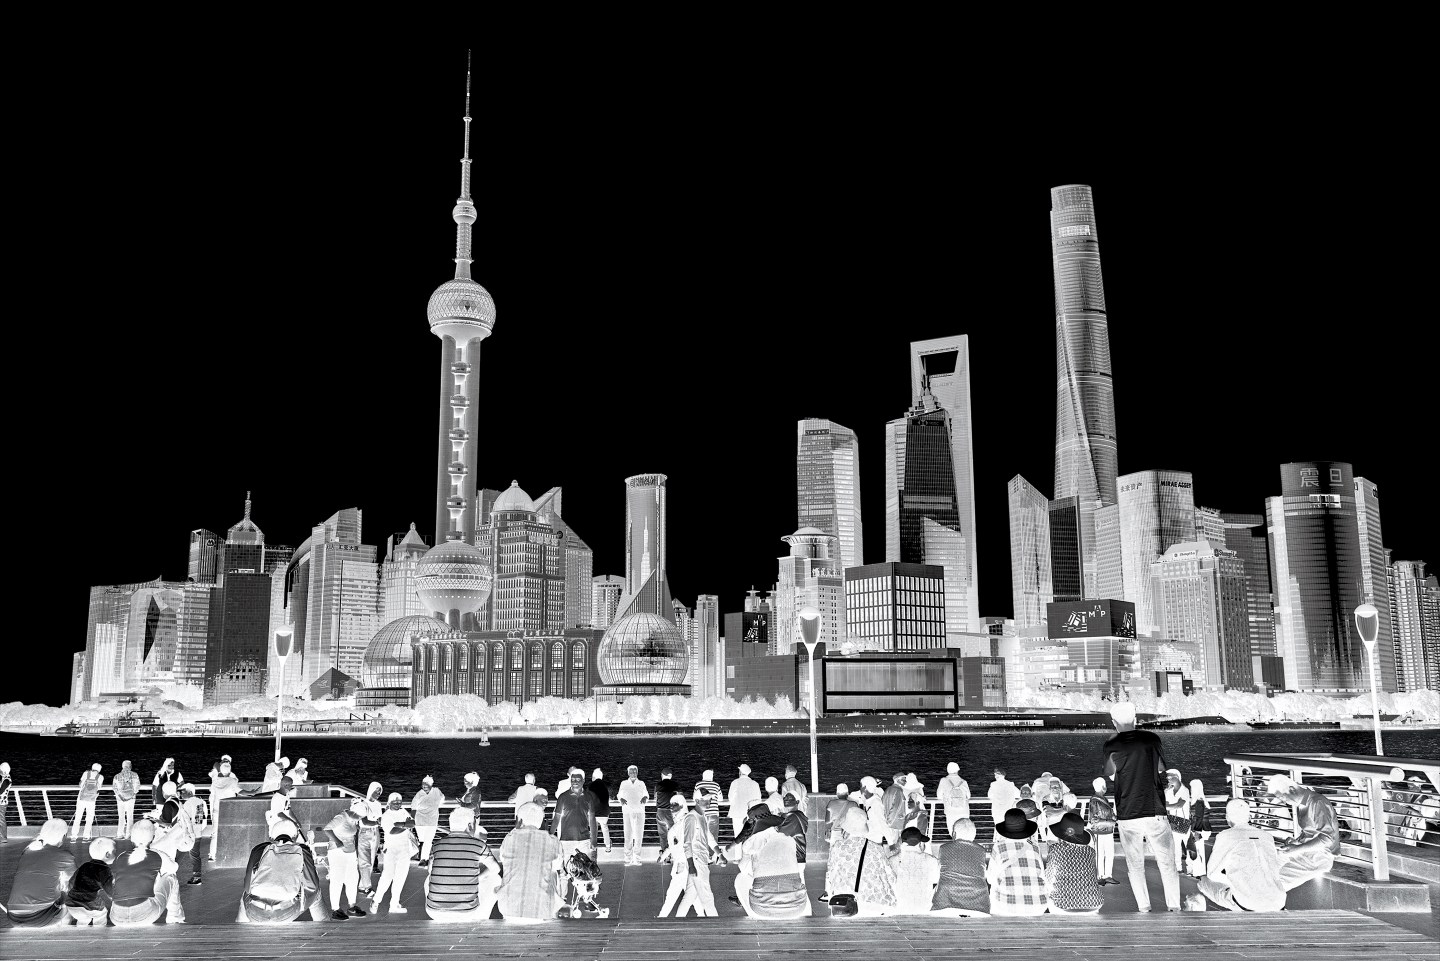 Viewers take in the Shanghai skyline from the Bund waterfront.